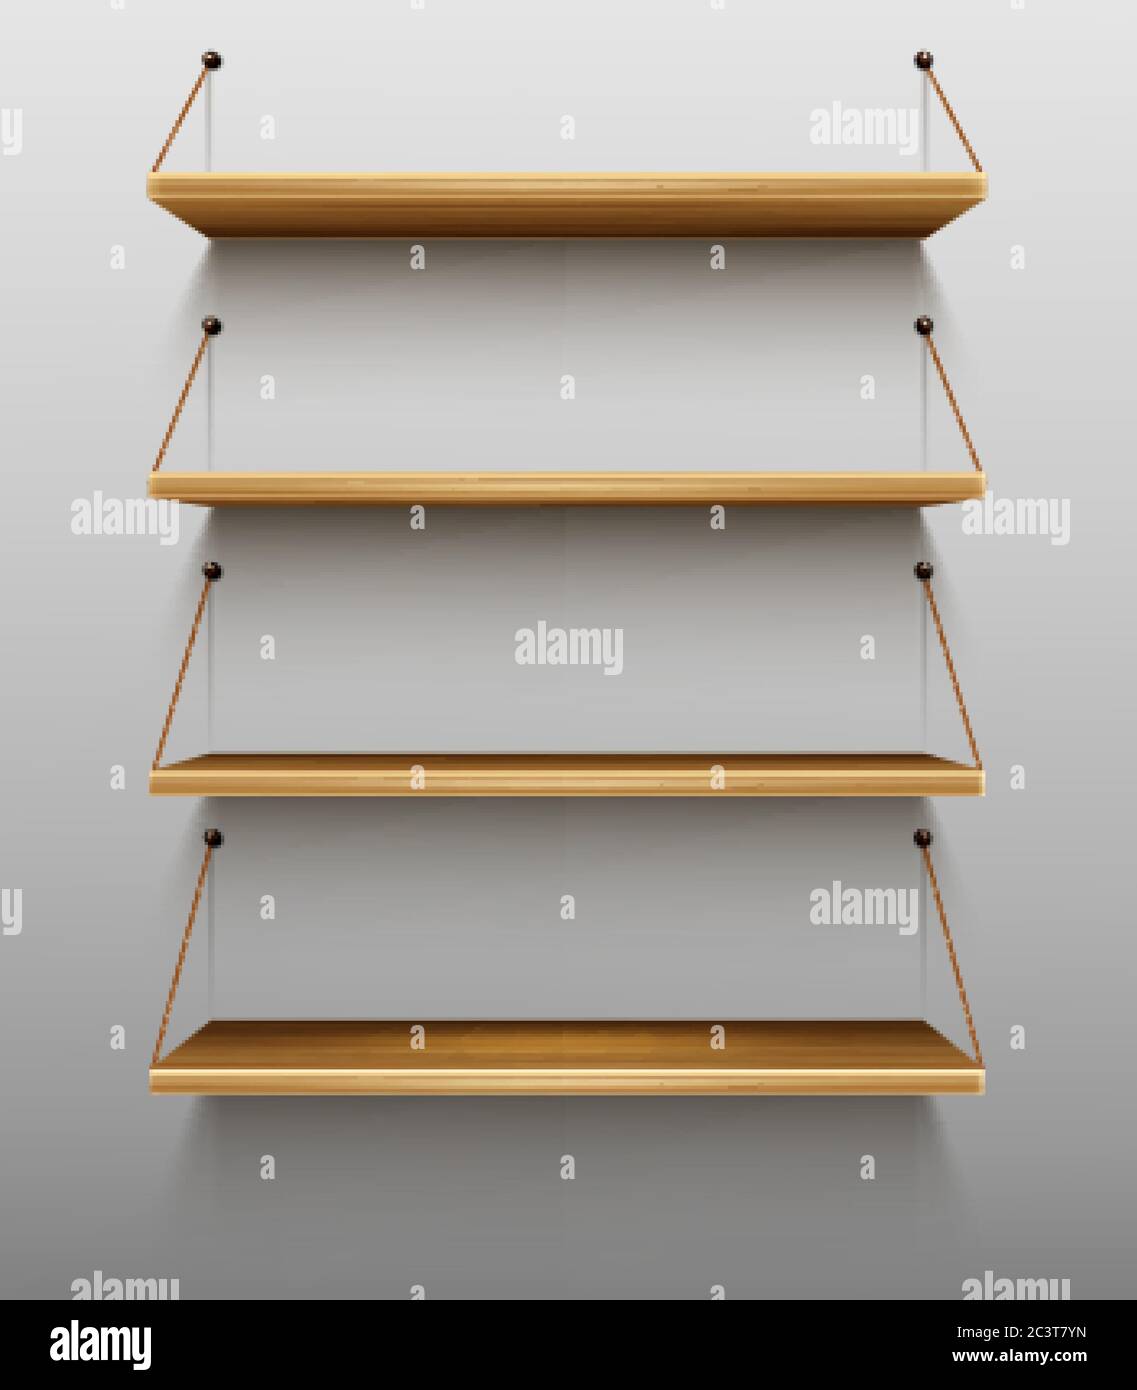 Empty wooden bookshelves on wall, shelves for books in library, wood rack hanging on ropes in store, brown timber planks for storage or gallery exhibition, realistic 3d vector illustration, mockup Stock Vector